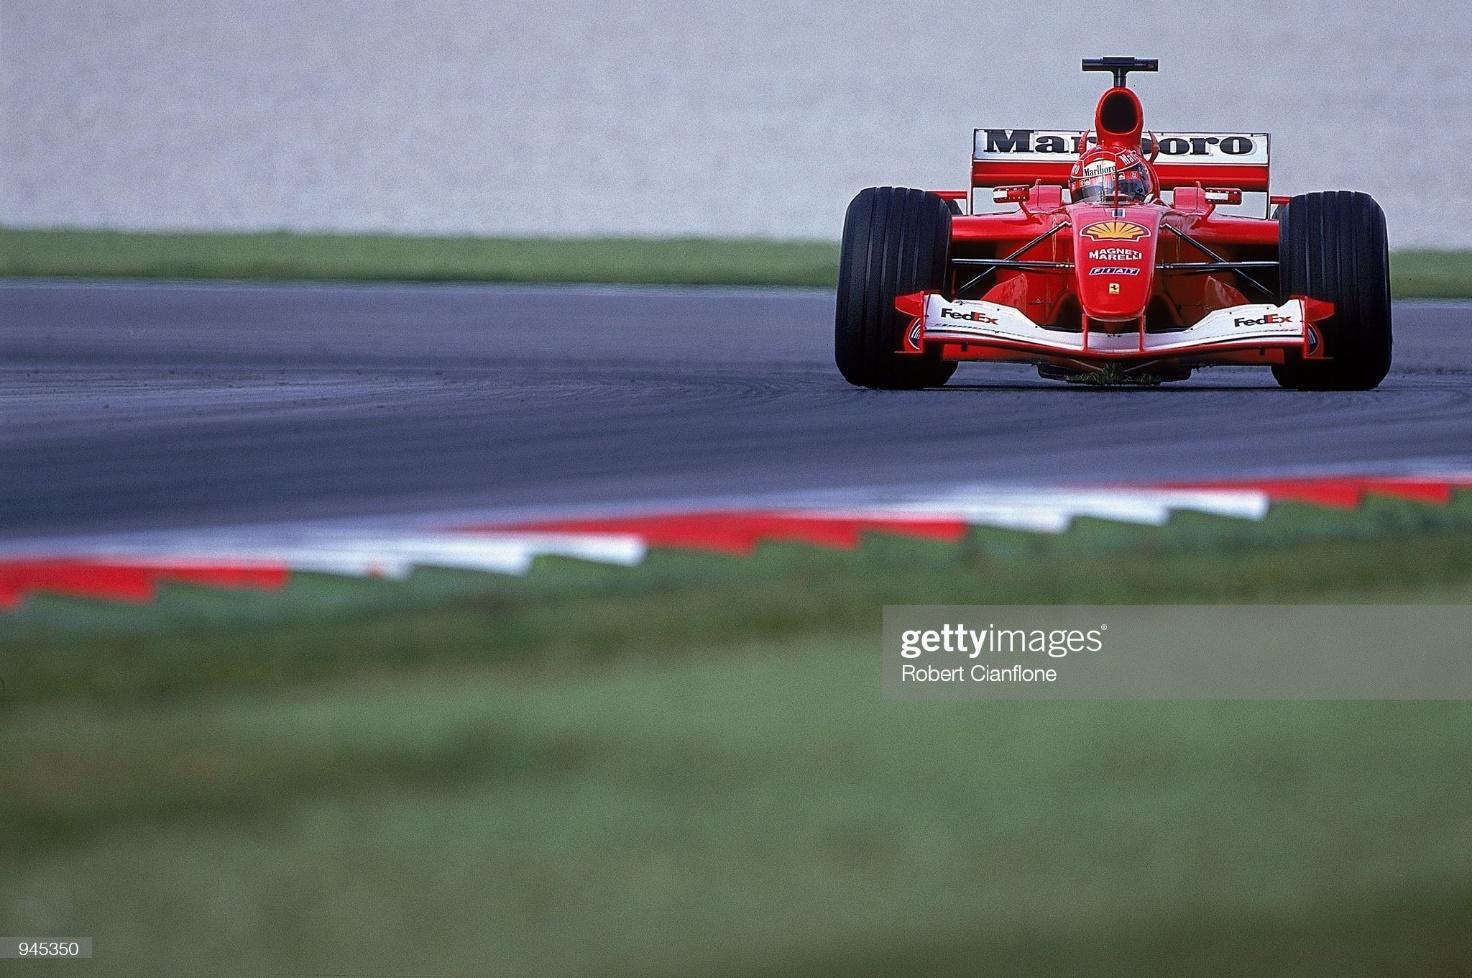 18 Mar 2001: Ferrari driver Michael Schumacher in action during the F1 Malaysian Grand Prix at the Sepang International Circuit.